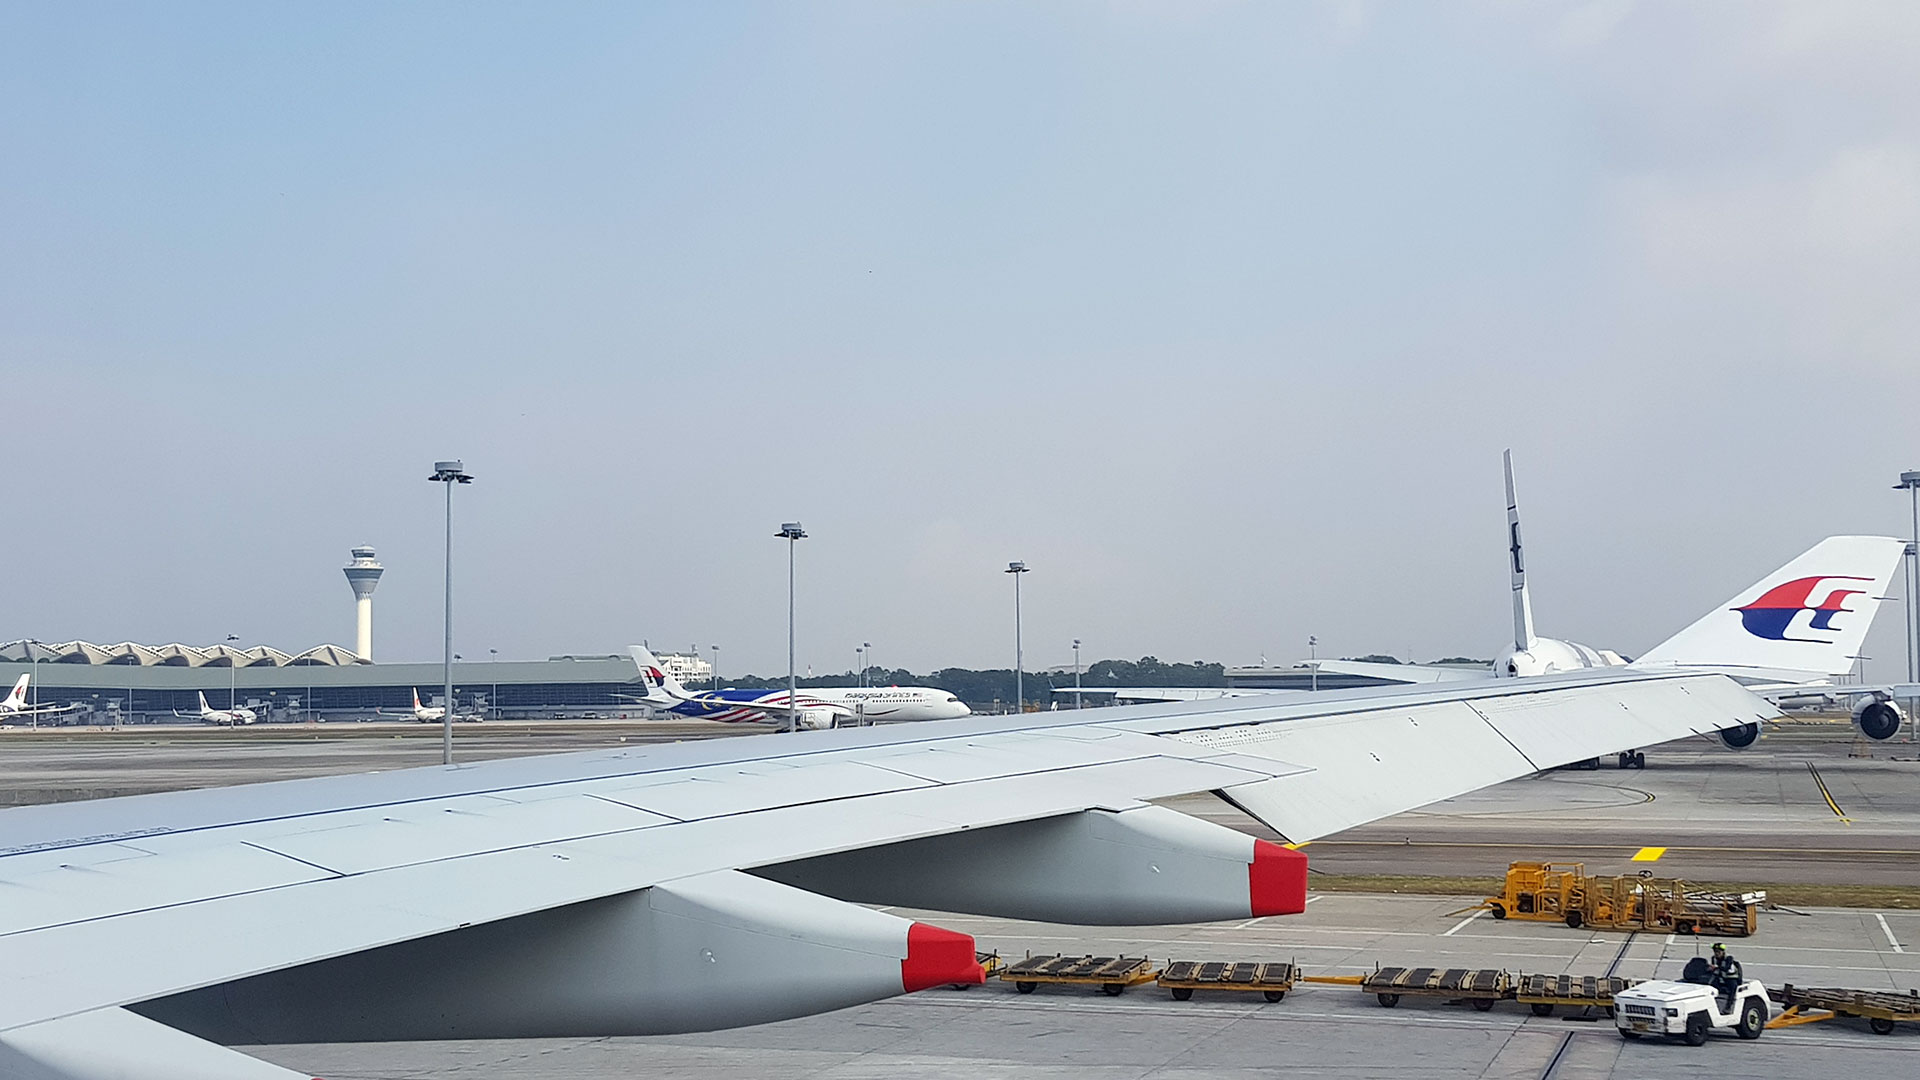 reinstated flights, Malaysia Airlines Airbus A330 wing view - KLIA